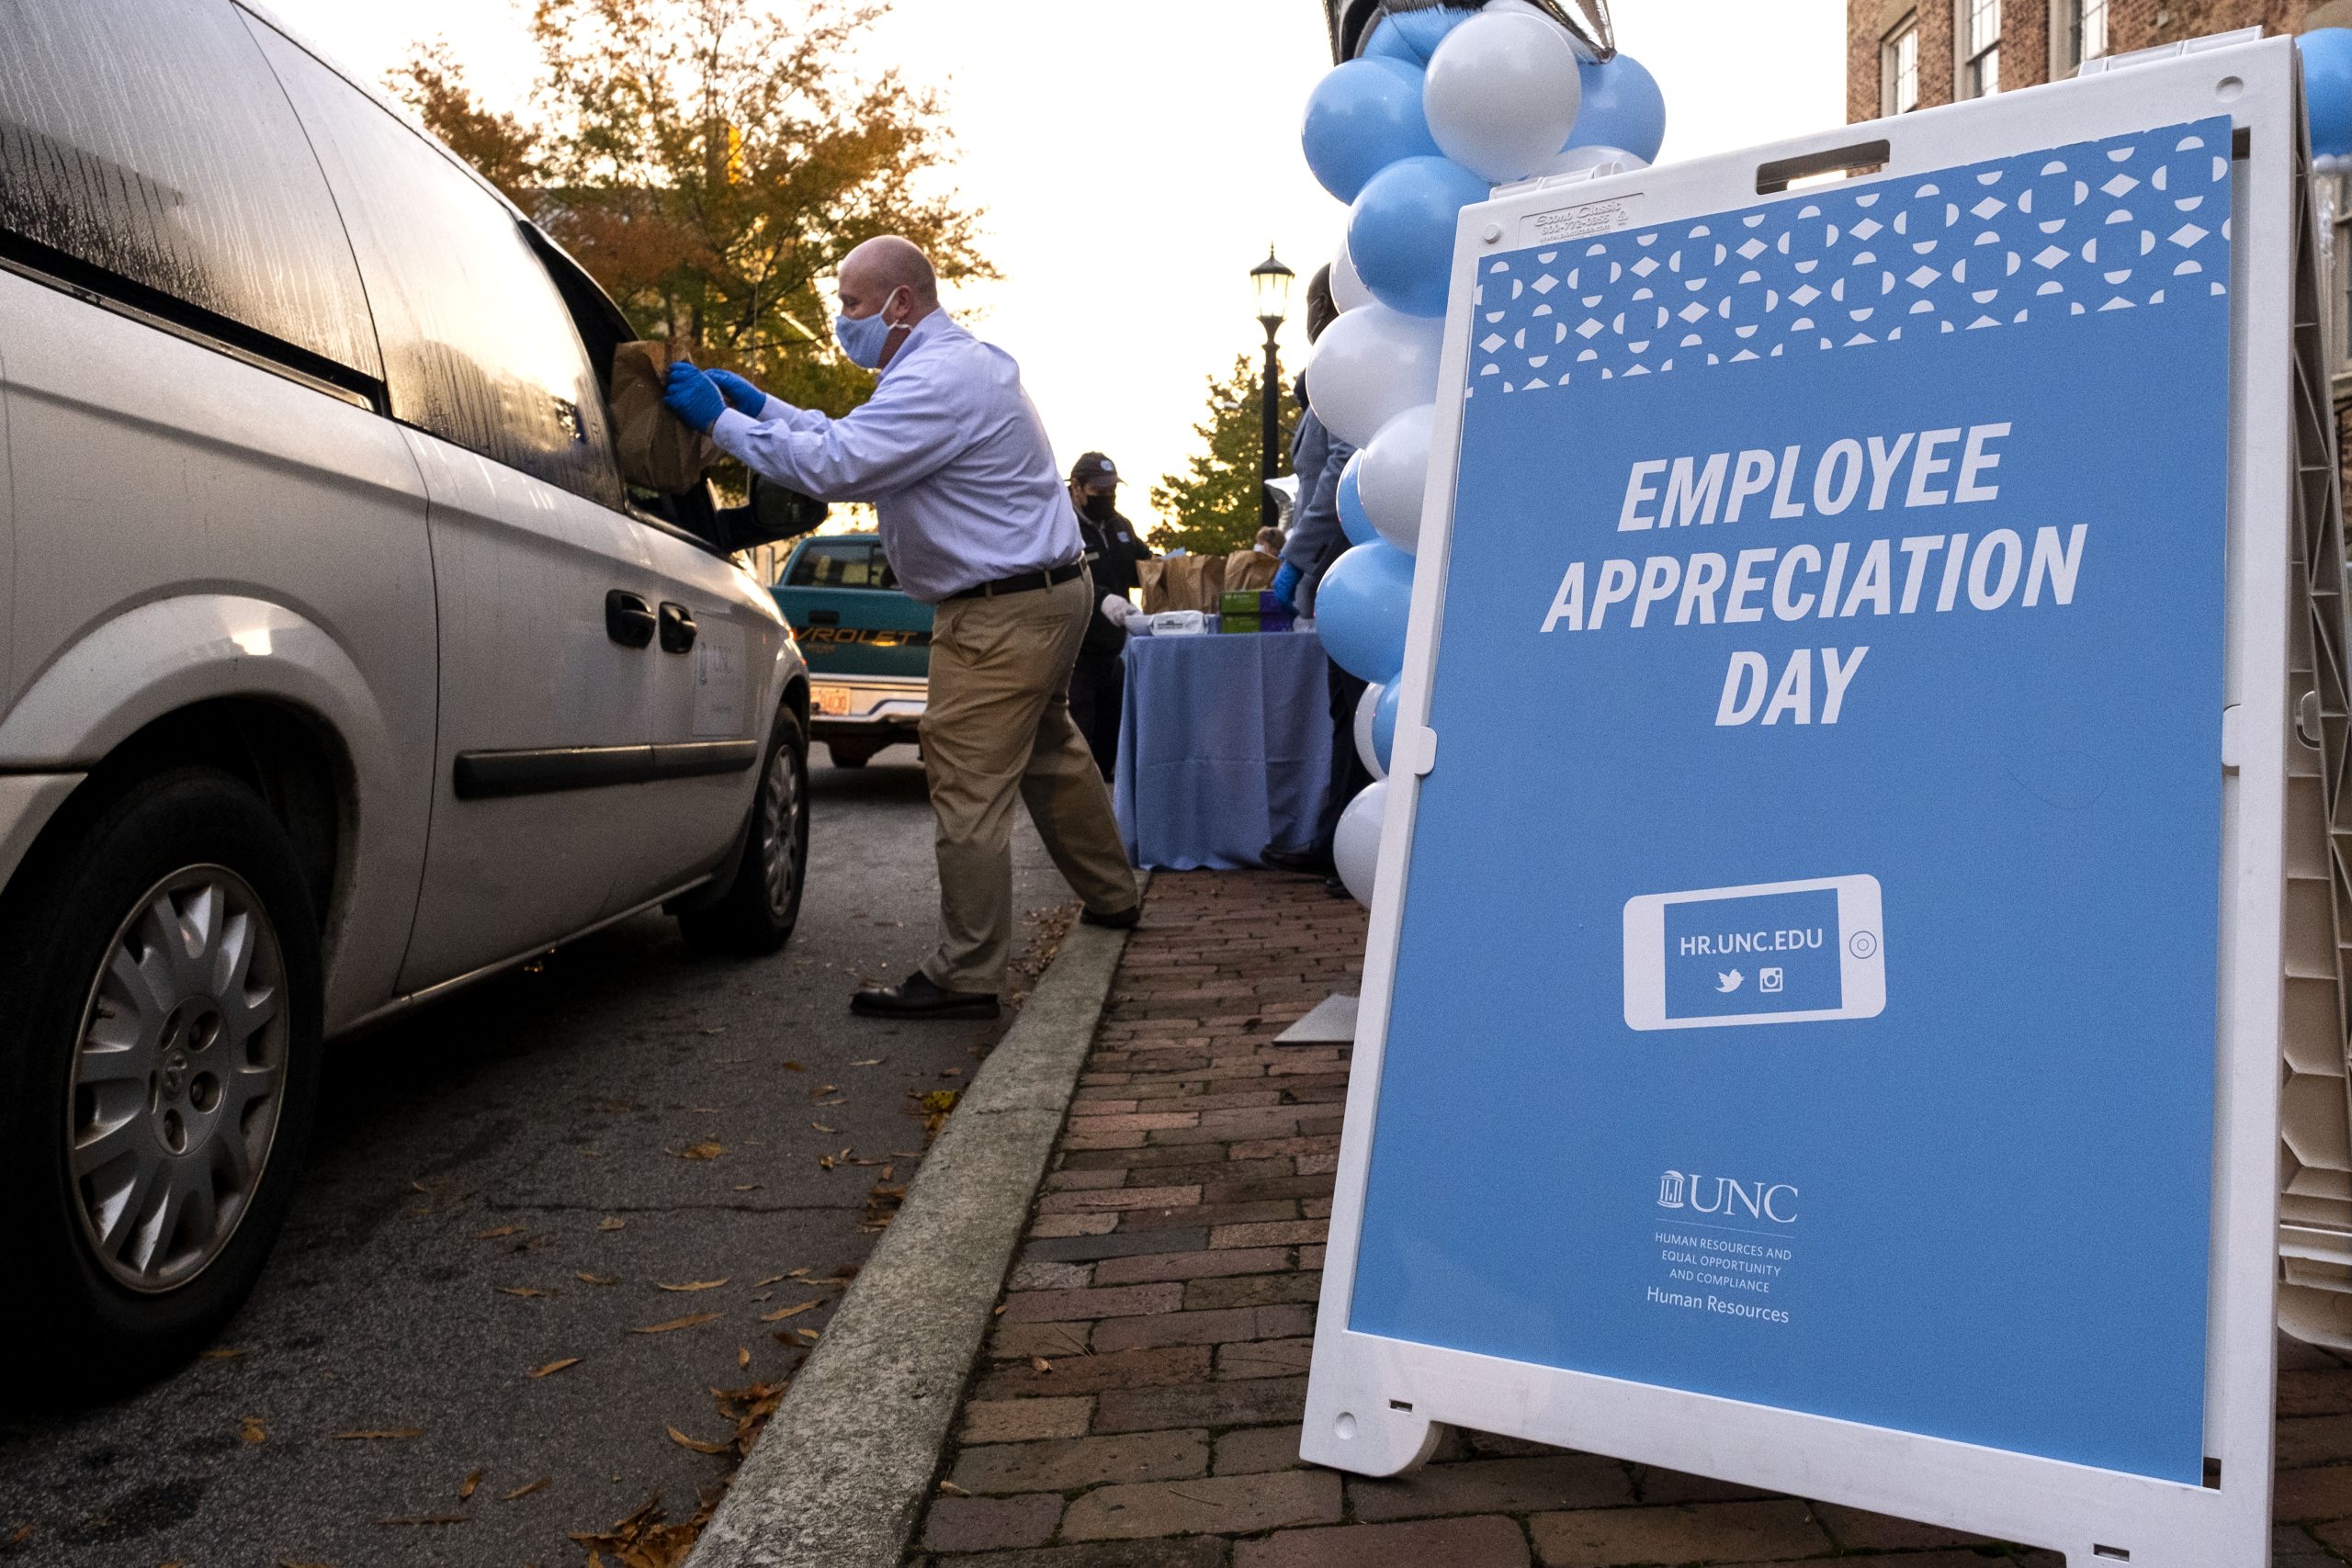 In past years, Employee Appreciation Day included in-person events across campus. During the pandemic, Employee Appreciation was comprised of virtual events throughout October, culminating in the breakfast drive-thru.